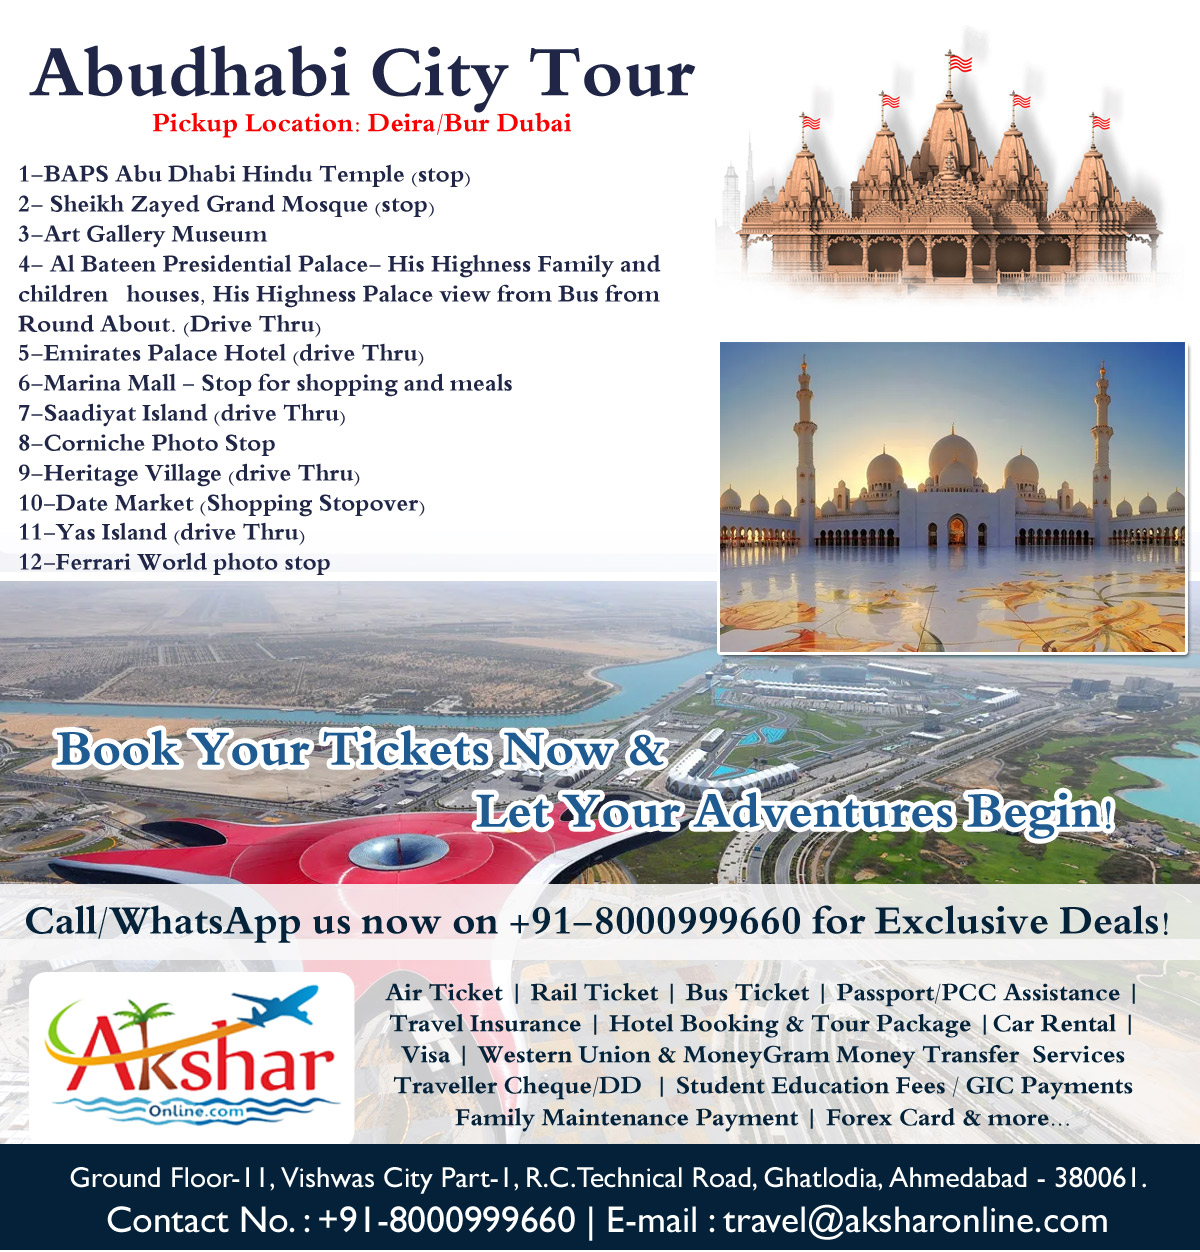 EXPLORE ABUDHABI WITH US - DAILY DEPARTURE OF ABUDHABI CITY TOUR FROM DUBAI/DEIRA - HOTEL PICKUP / DROP, 1-BAPS Abu Dhabi Hindu Temple (stop) 2- Sheikh Zayed Grand Mosque (stop) 3-Art Gallery Museum 4- Al Bateen Presidential Palace- His Highness Family and children   houses, His Highness Palace view from Bus from Round About. (Drive Thru) 5-Emirates Palace Hotel (drive Thru) 6-Marina Mall - Stop for shopping and meals 7-Saadiyat Island (drive Thru) 8-Corniche Photo Stop 9-Heritage Village (drive Thru) 10-Date Market (Shopping Stopover) 11-Yas Island (drive Thru) 12-Ferrari World photo stop,, Air Ticket | Rail Ticket | Bus Ticket | Passport/PCC Assistance | Travel Insurance | Hotel Booking & Tour Package |Car Rental | Visa | Western Union & MoneyGram Money Transfer  Services Traveller Cheque/DD  | Student Education Fees / GIC Payments Family Maintenance Payment | Forex Card & more..., 8000999660, info.akshar@gmail.com, mybooking@live.in, travel@aksharonline.com, aksharonline, aksharonline.com